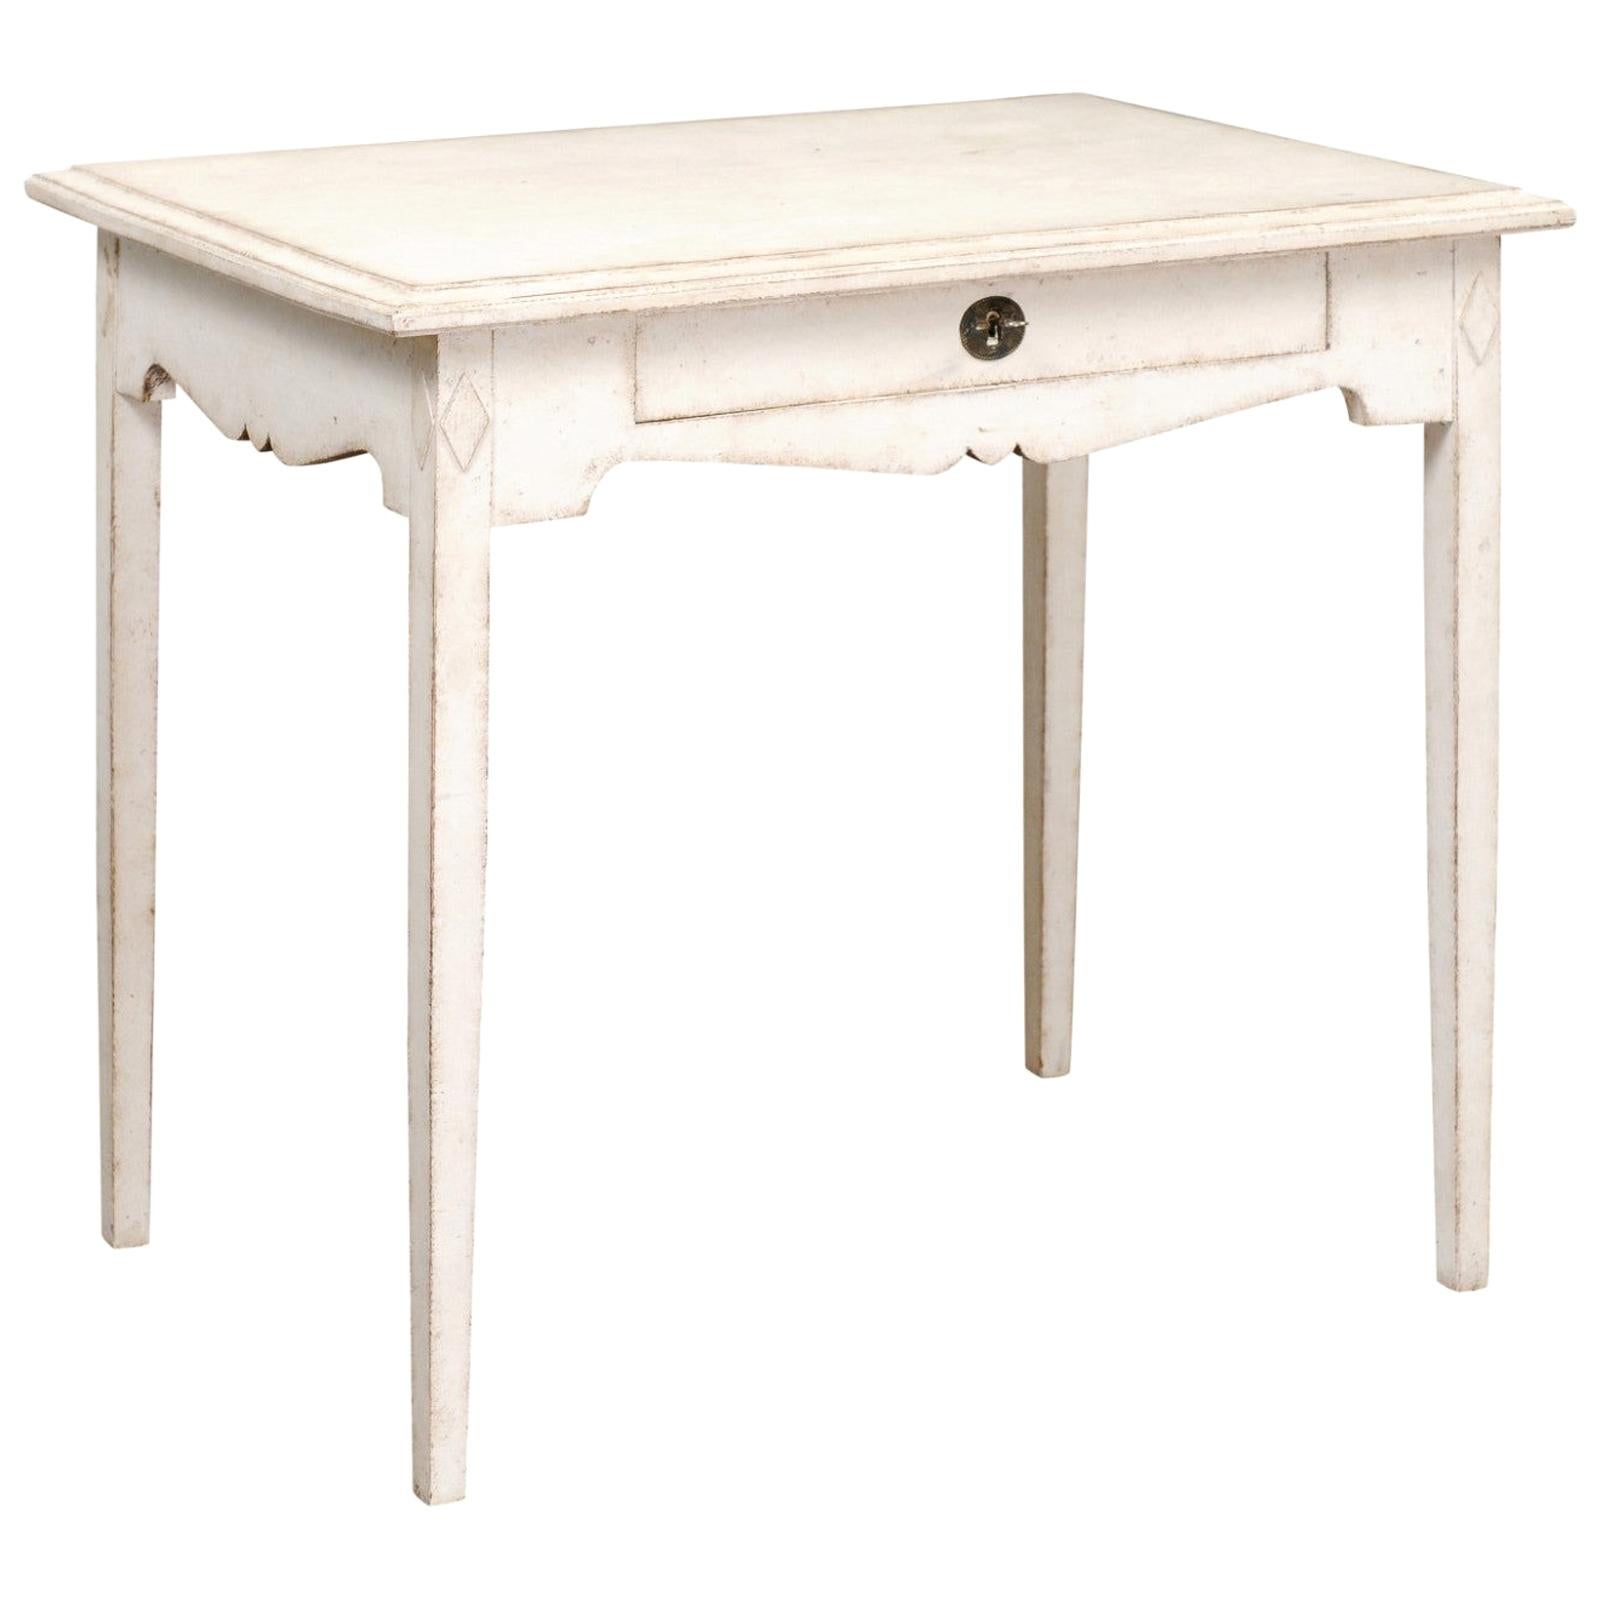 Swedish Freestanding Painted Writing Table Created for Queen Alexandrine For Sale